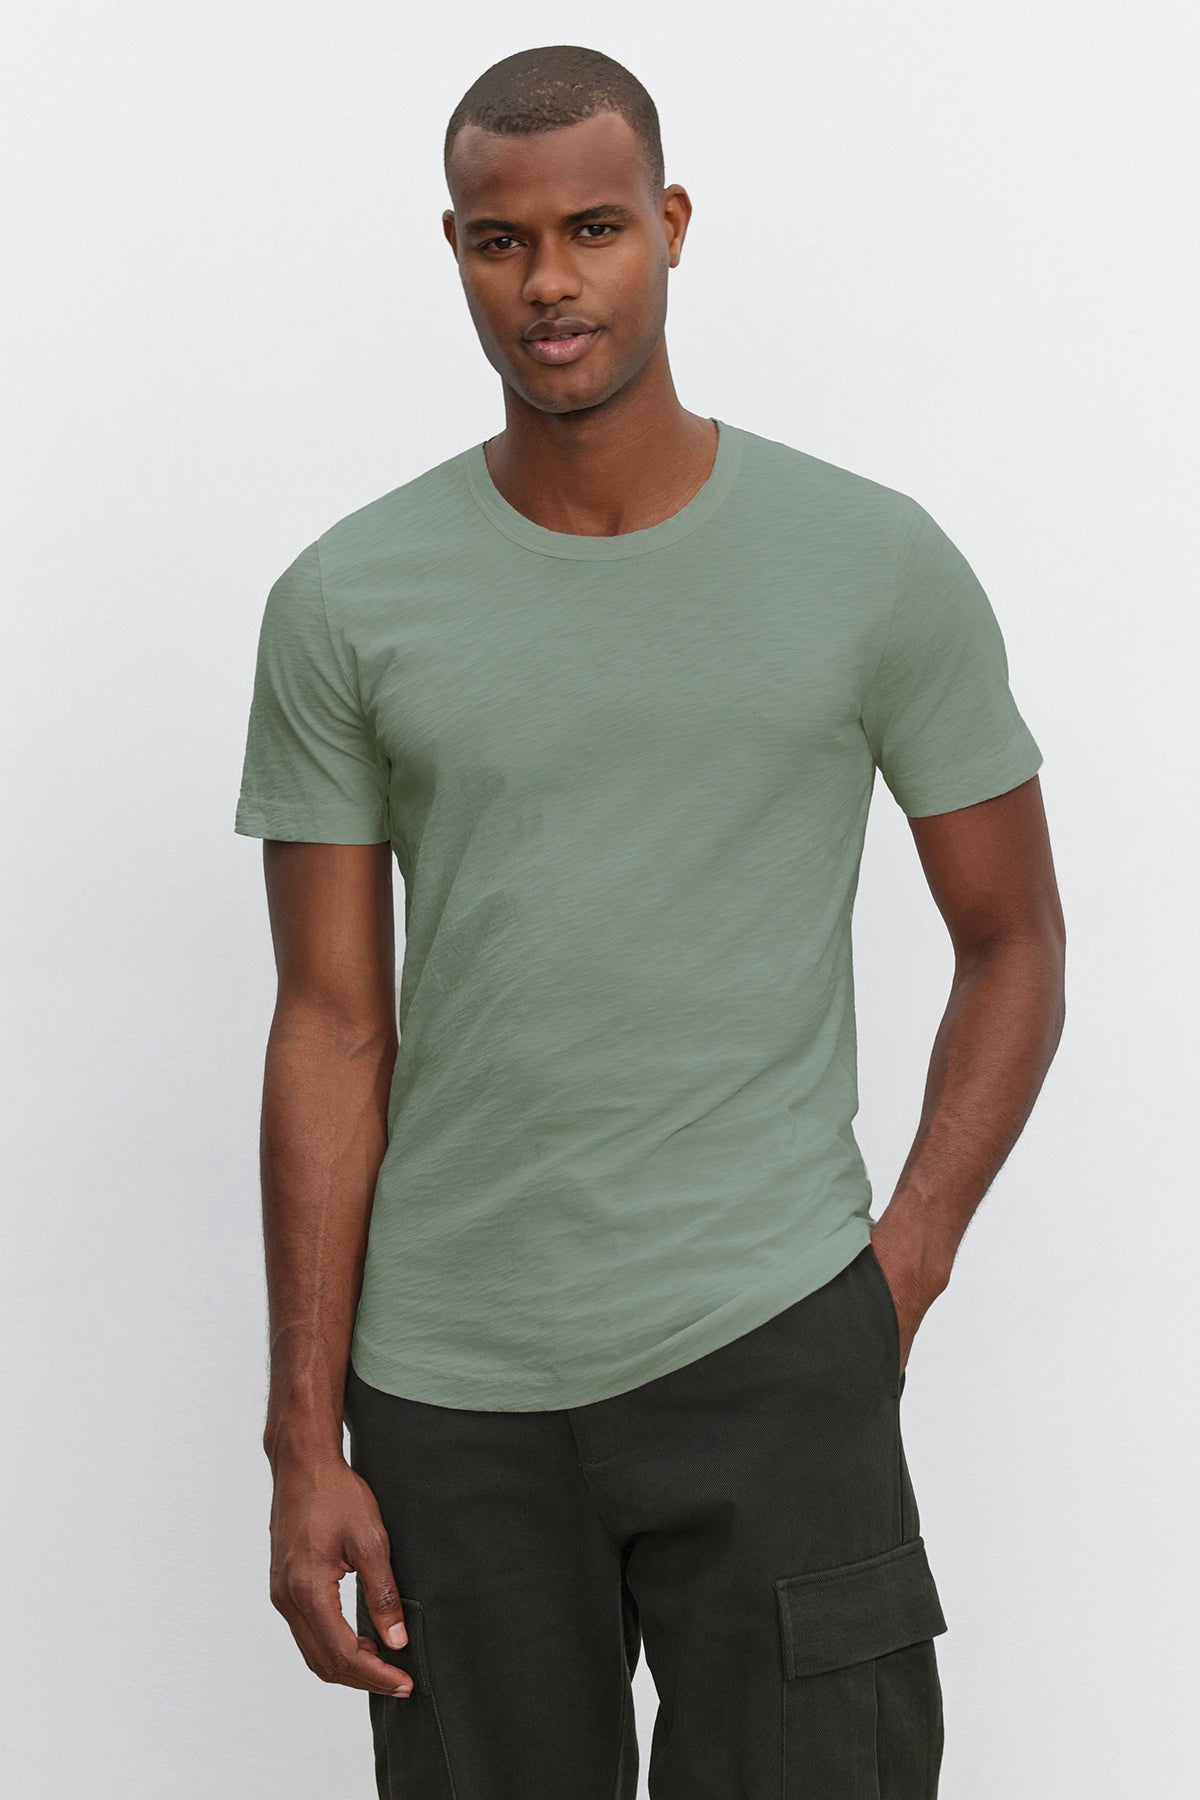 A man wearing a stylish light green AMARO TEE by Velvet by Graham & Spencer and black cargo pants stands against a plain white background.-36909384696001